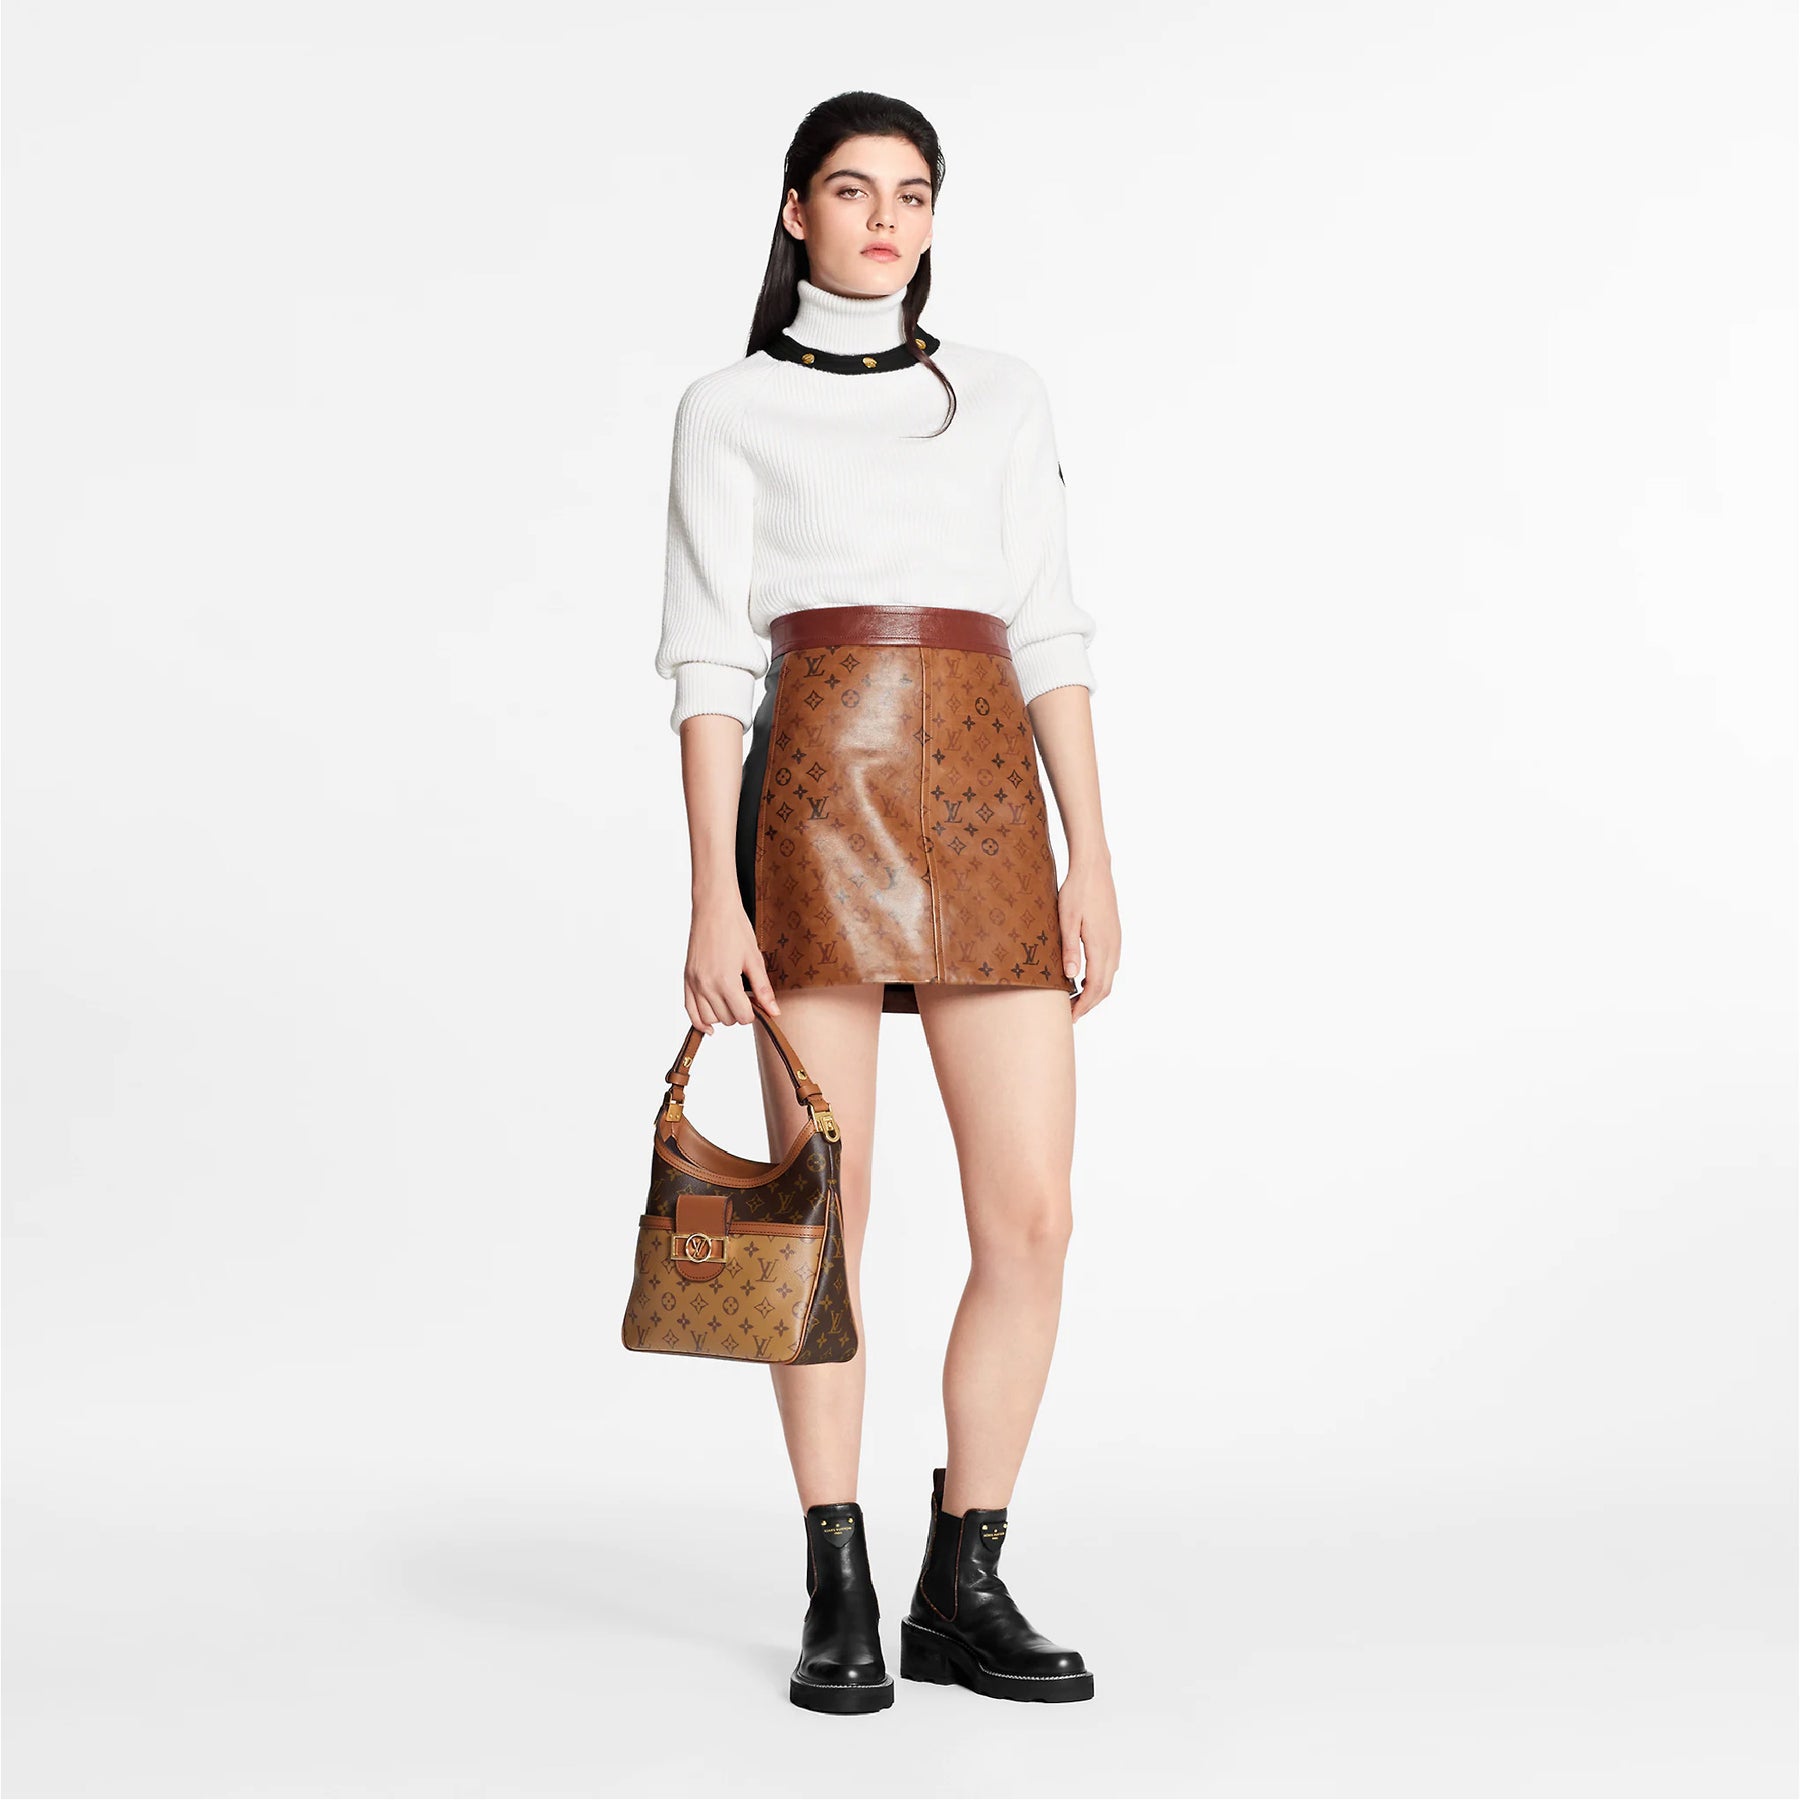 Louis Vuitton Tattoo Monogram A-Line Mini Leather Skirt SOLD OUT